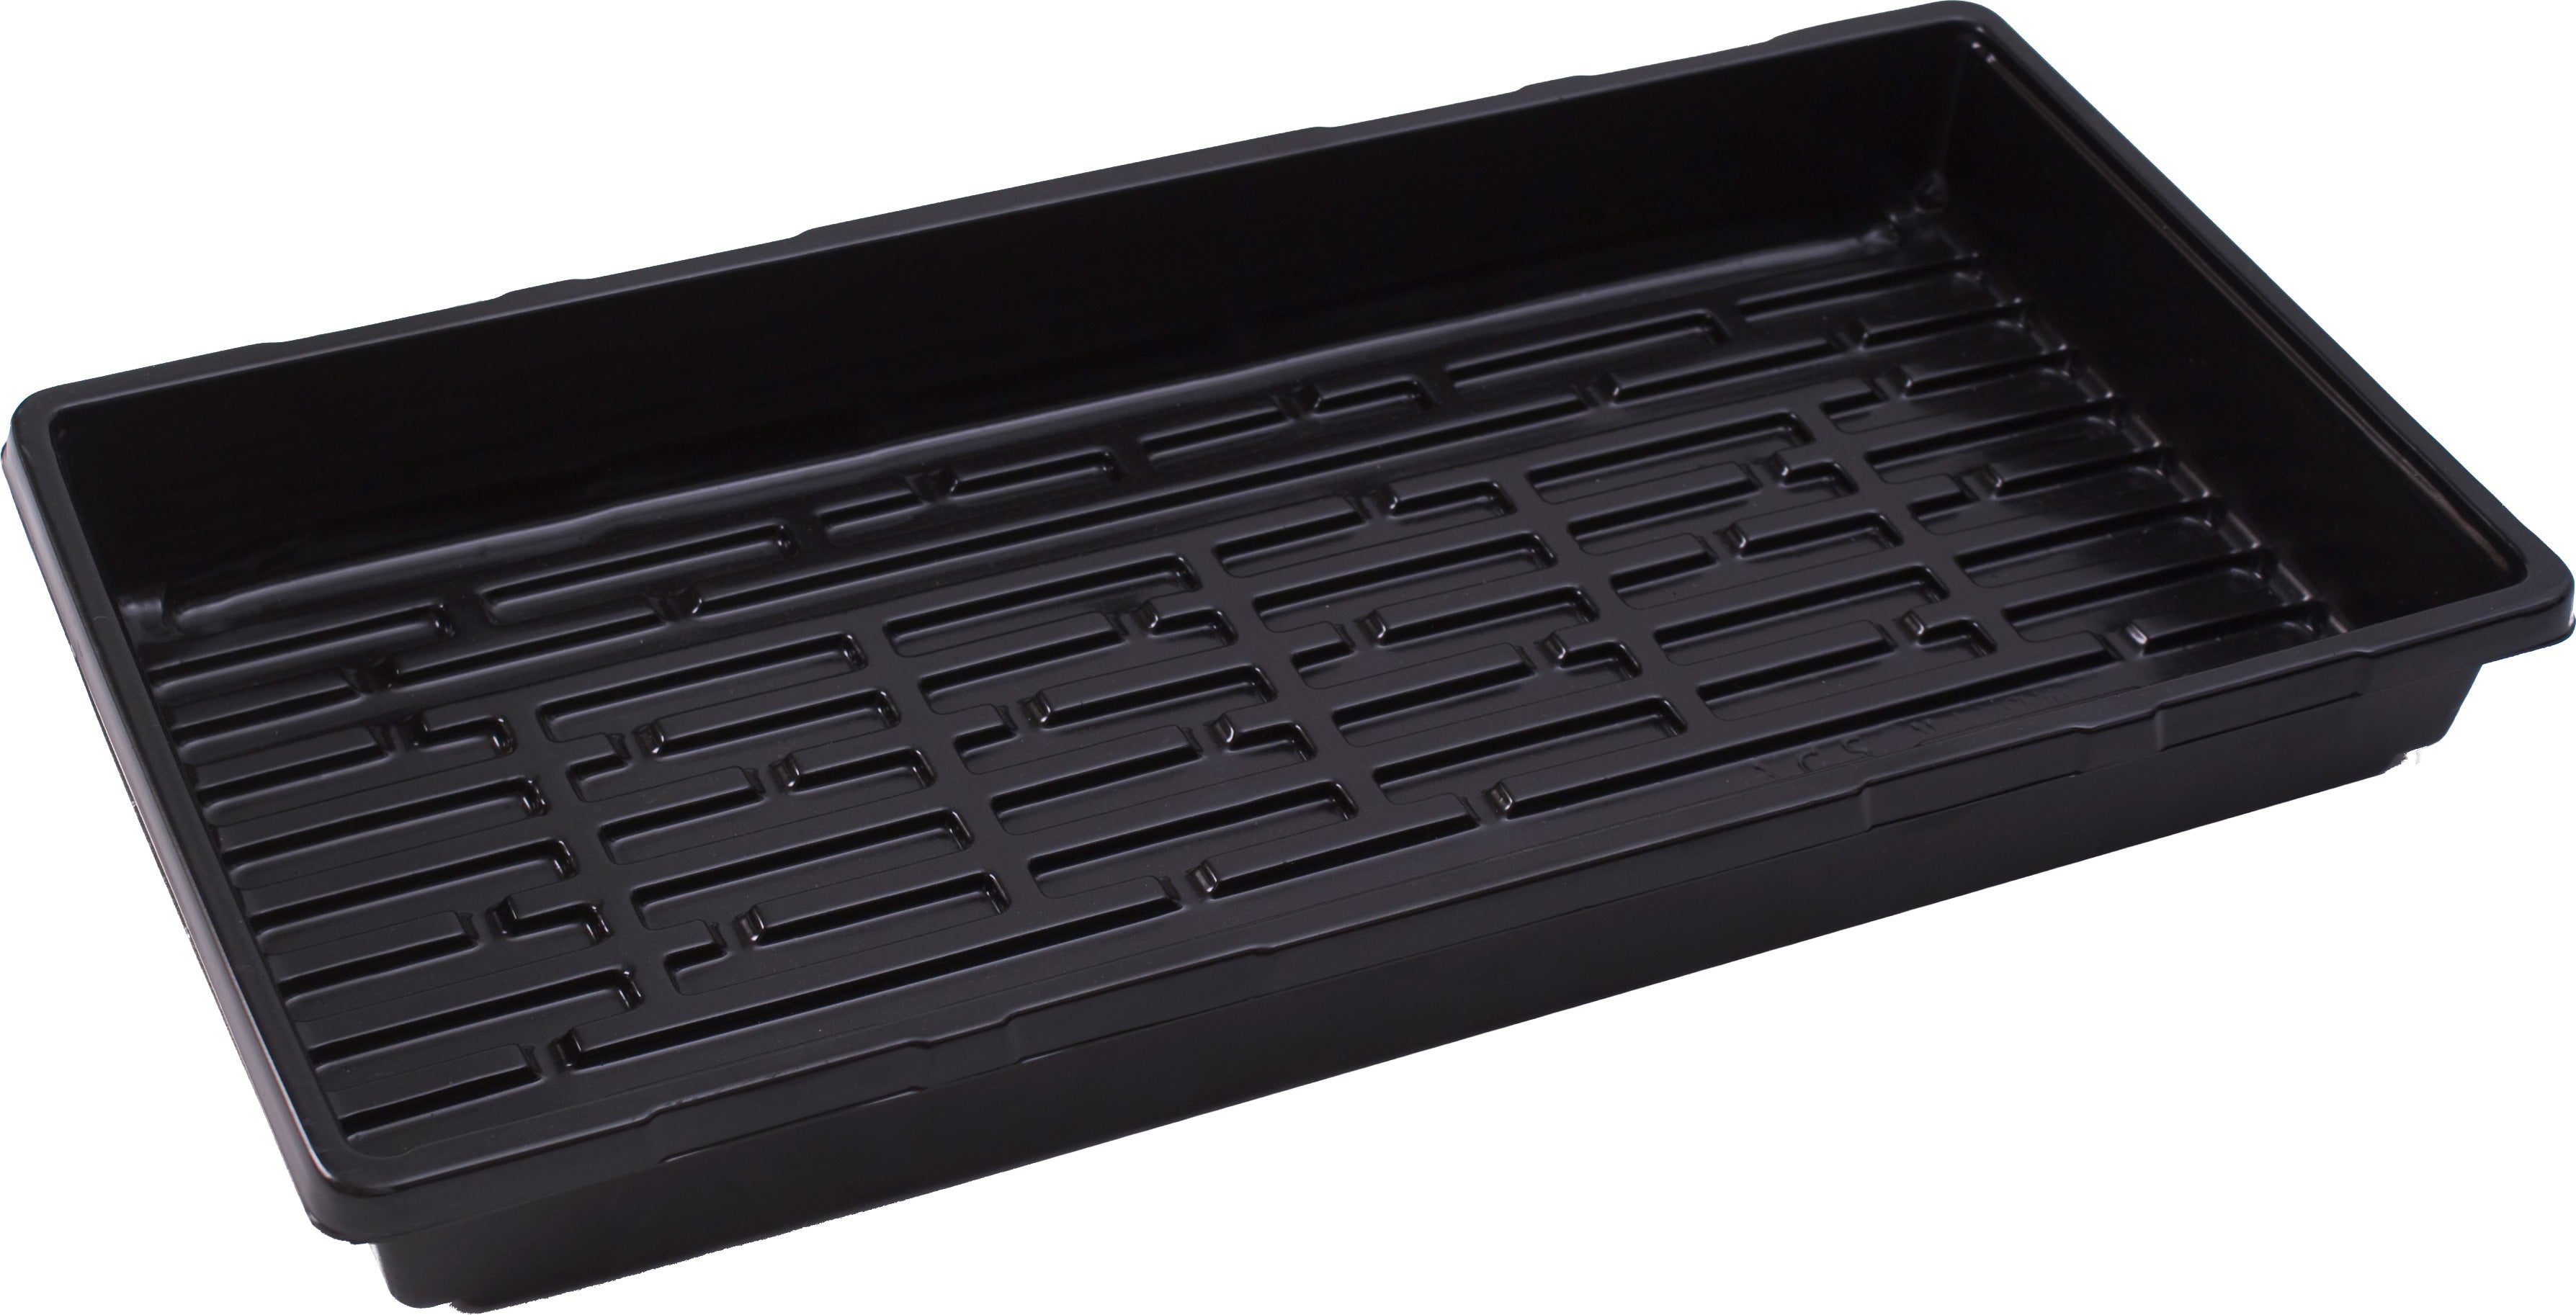 1020 Double Thick Tray